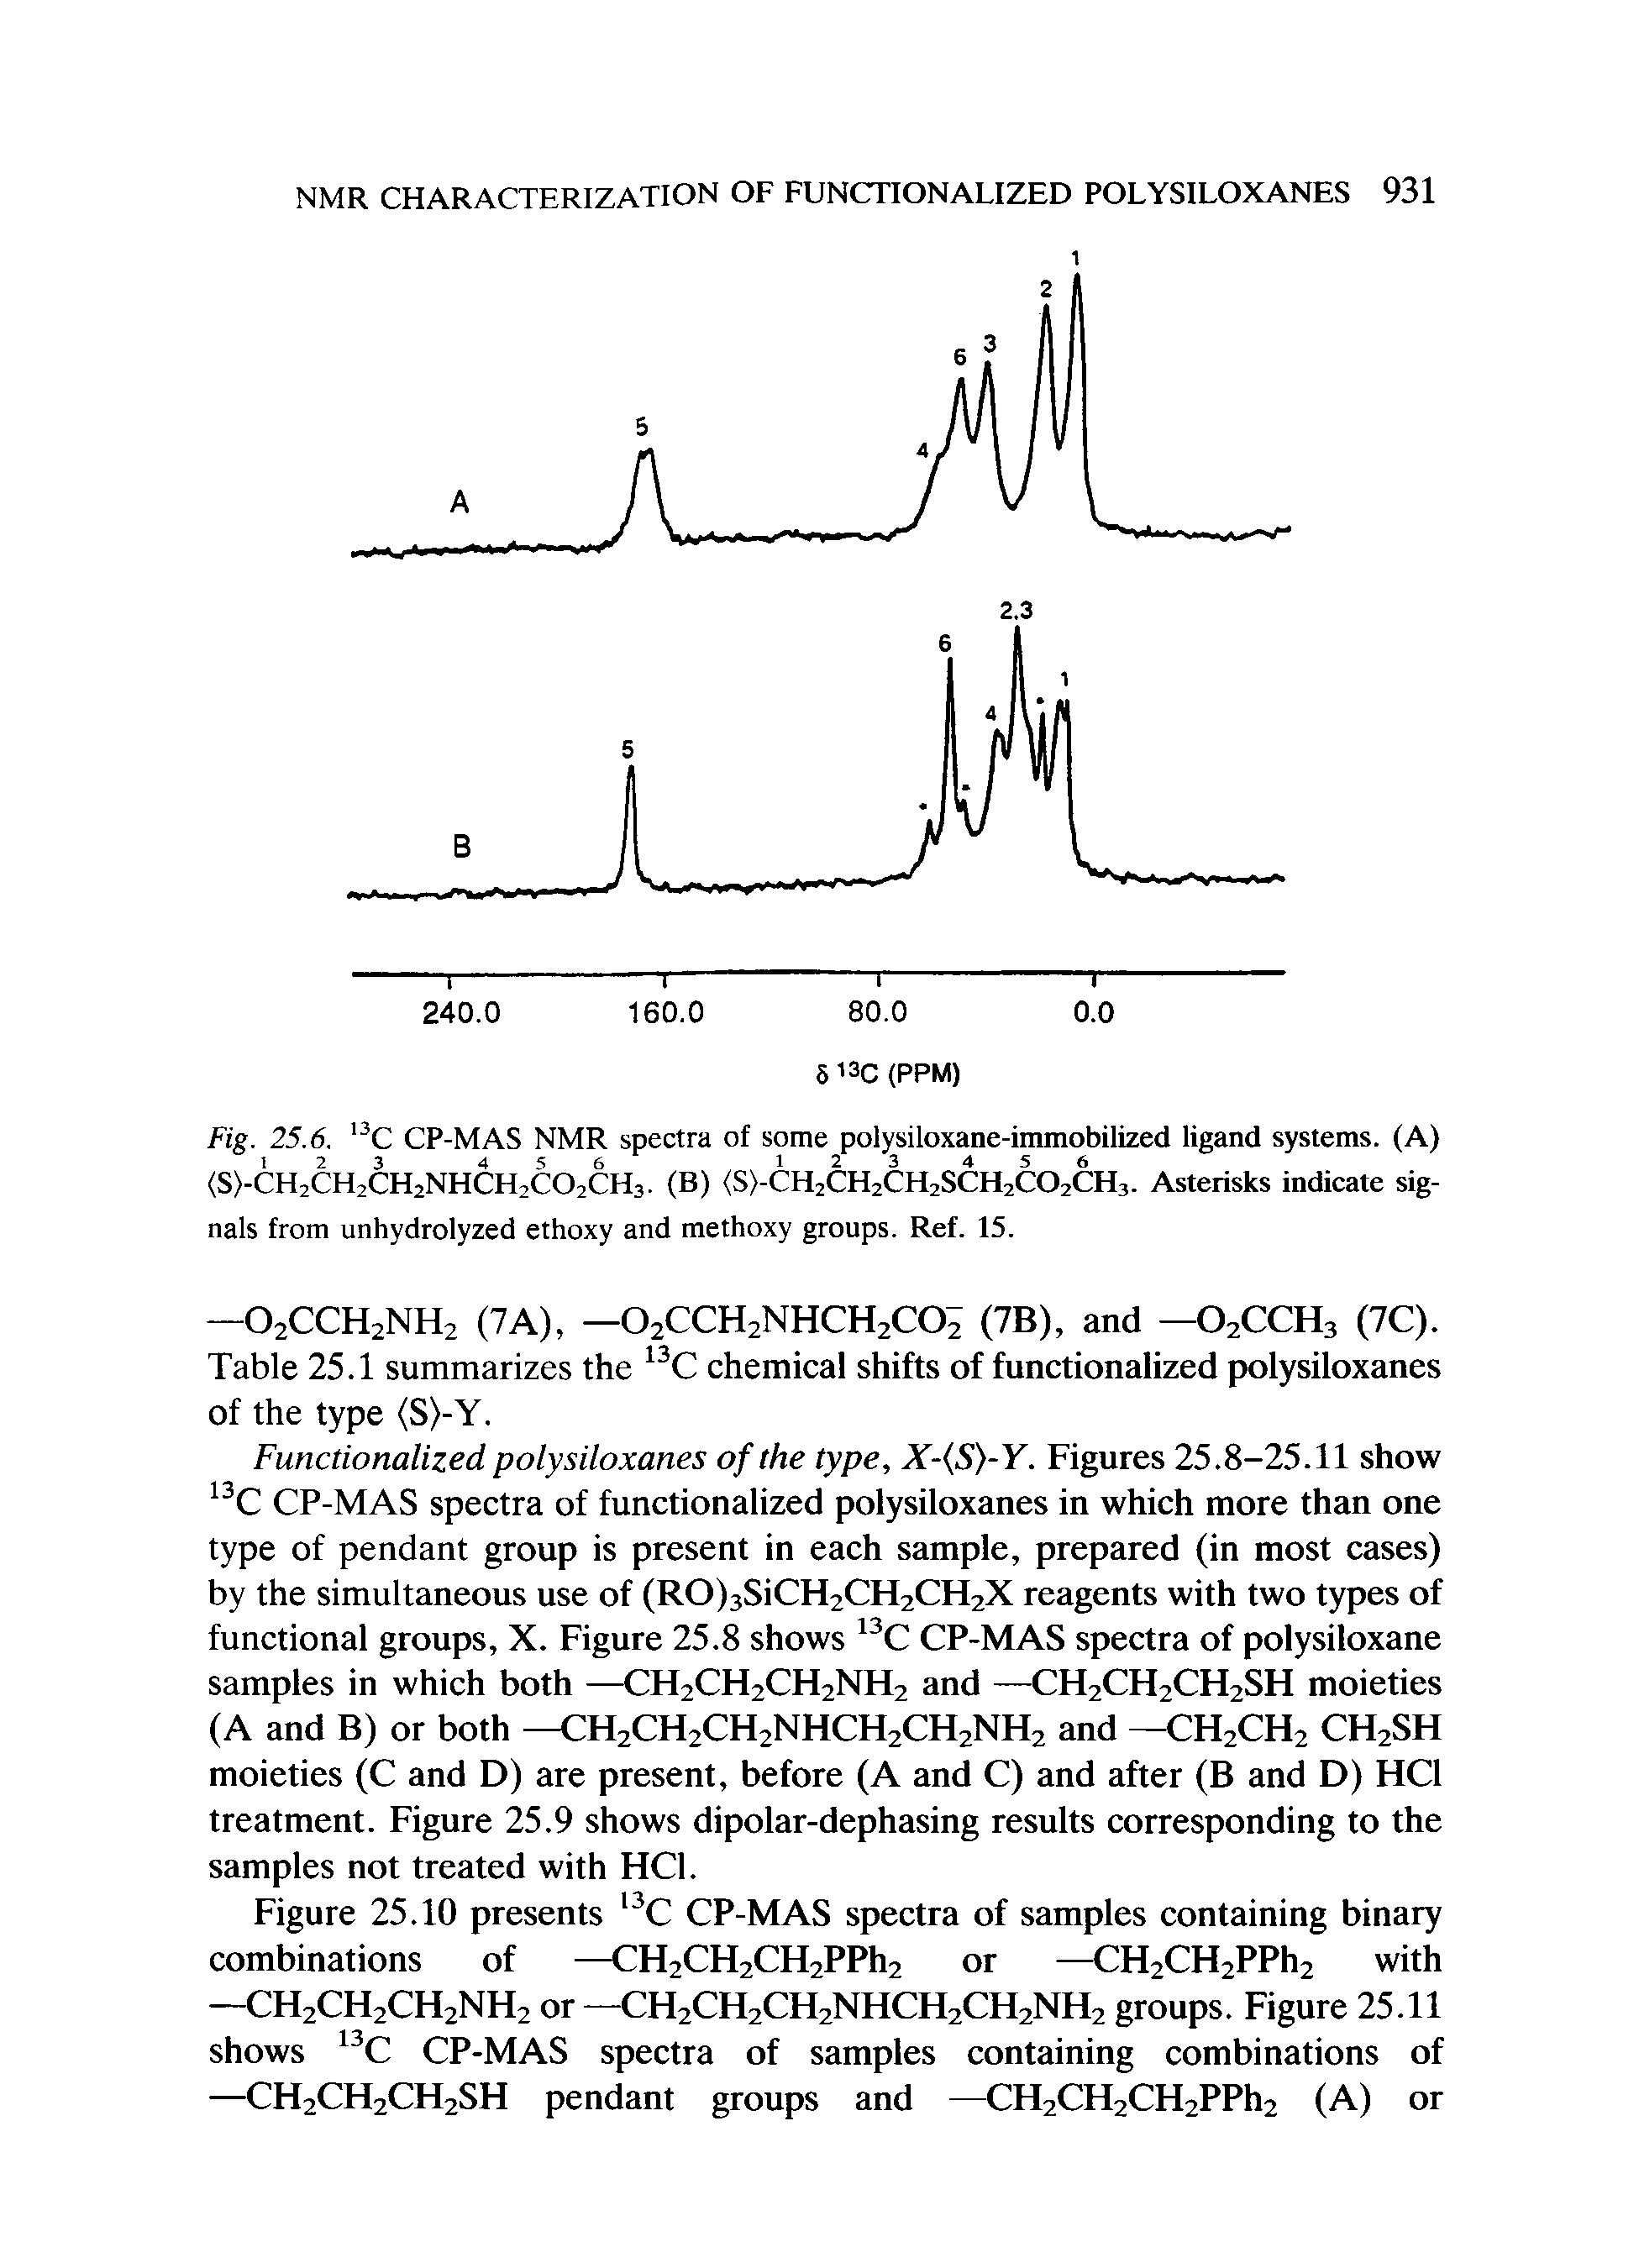 Fig. 25.6. C CP-MAS NMR spectra of some polysiloxane-immobilized ligand systems. (A) (S)-CH2CH2CH2NHCH2C02CH3. (B) <S>-CH2CH2CH2SCH2C02CH3- Asterisks indicate signals from unhydrolyzed ethoxy and methoxy groups. Ref. 15.